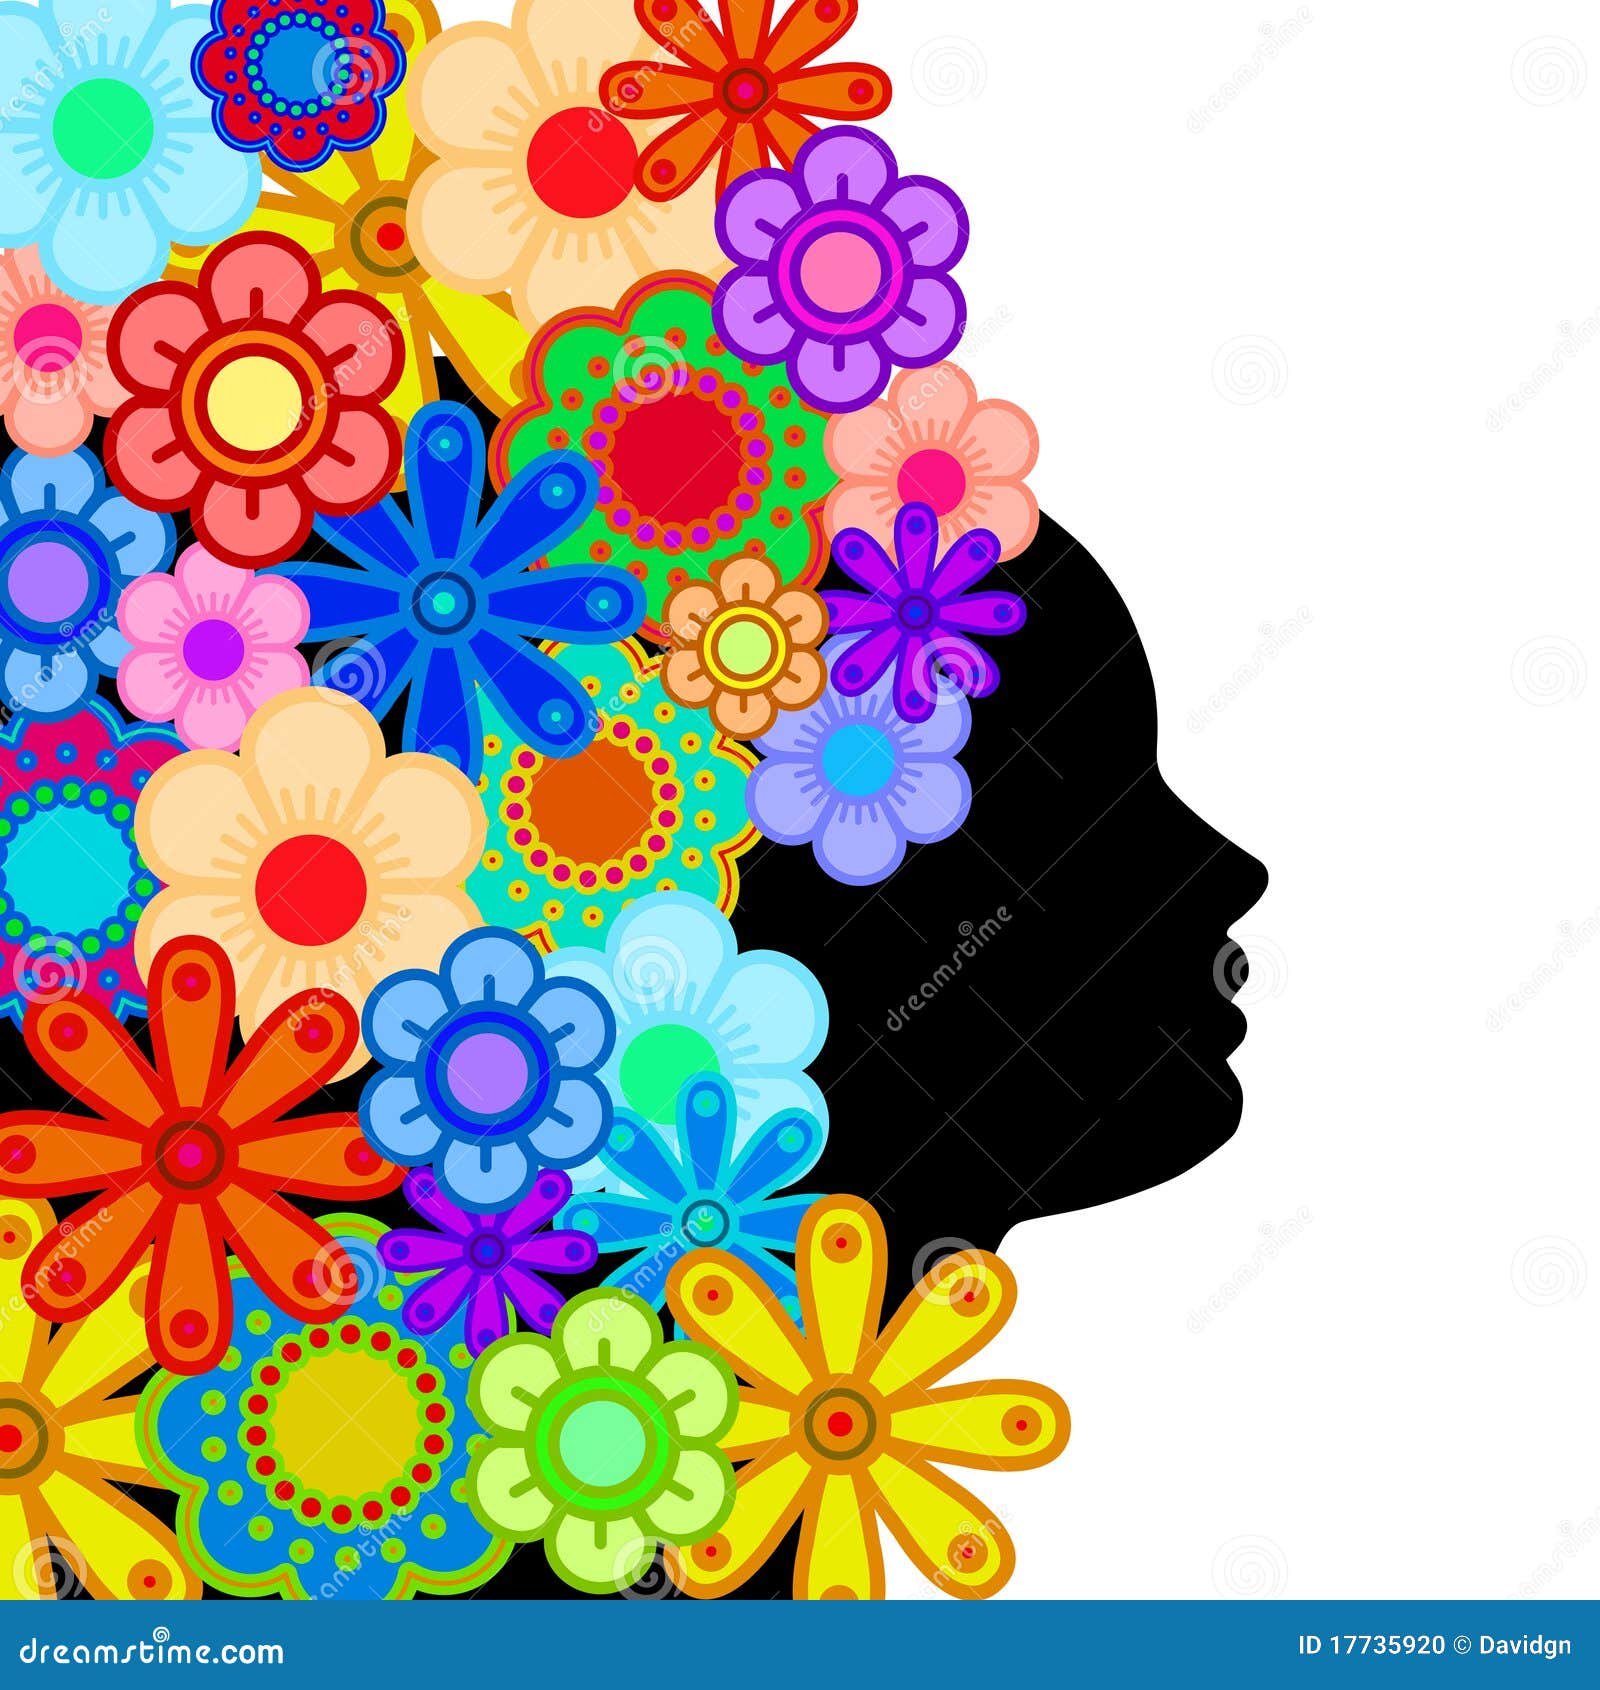 Woman Face Silhouette Hair Colorful Flowers Stock Photo - Image: 17735920